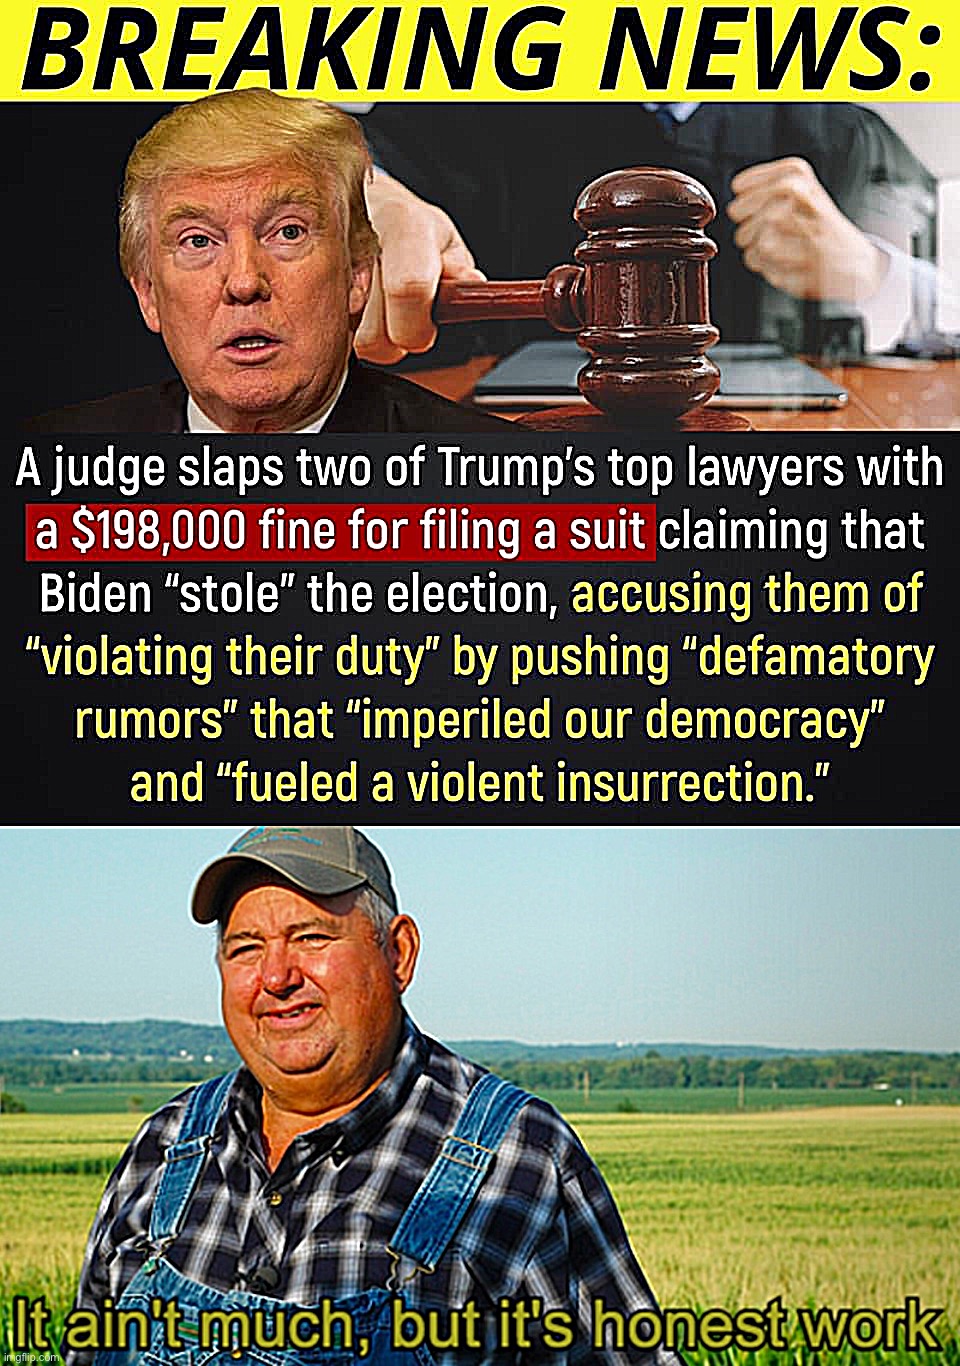 Perhaps disbarment and jail time would have been better, but oh well, we’ll take it | image tagged in judge fines trump lawyers,it ain't much but it's honest work | made w/ Imgflip meme maker